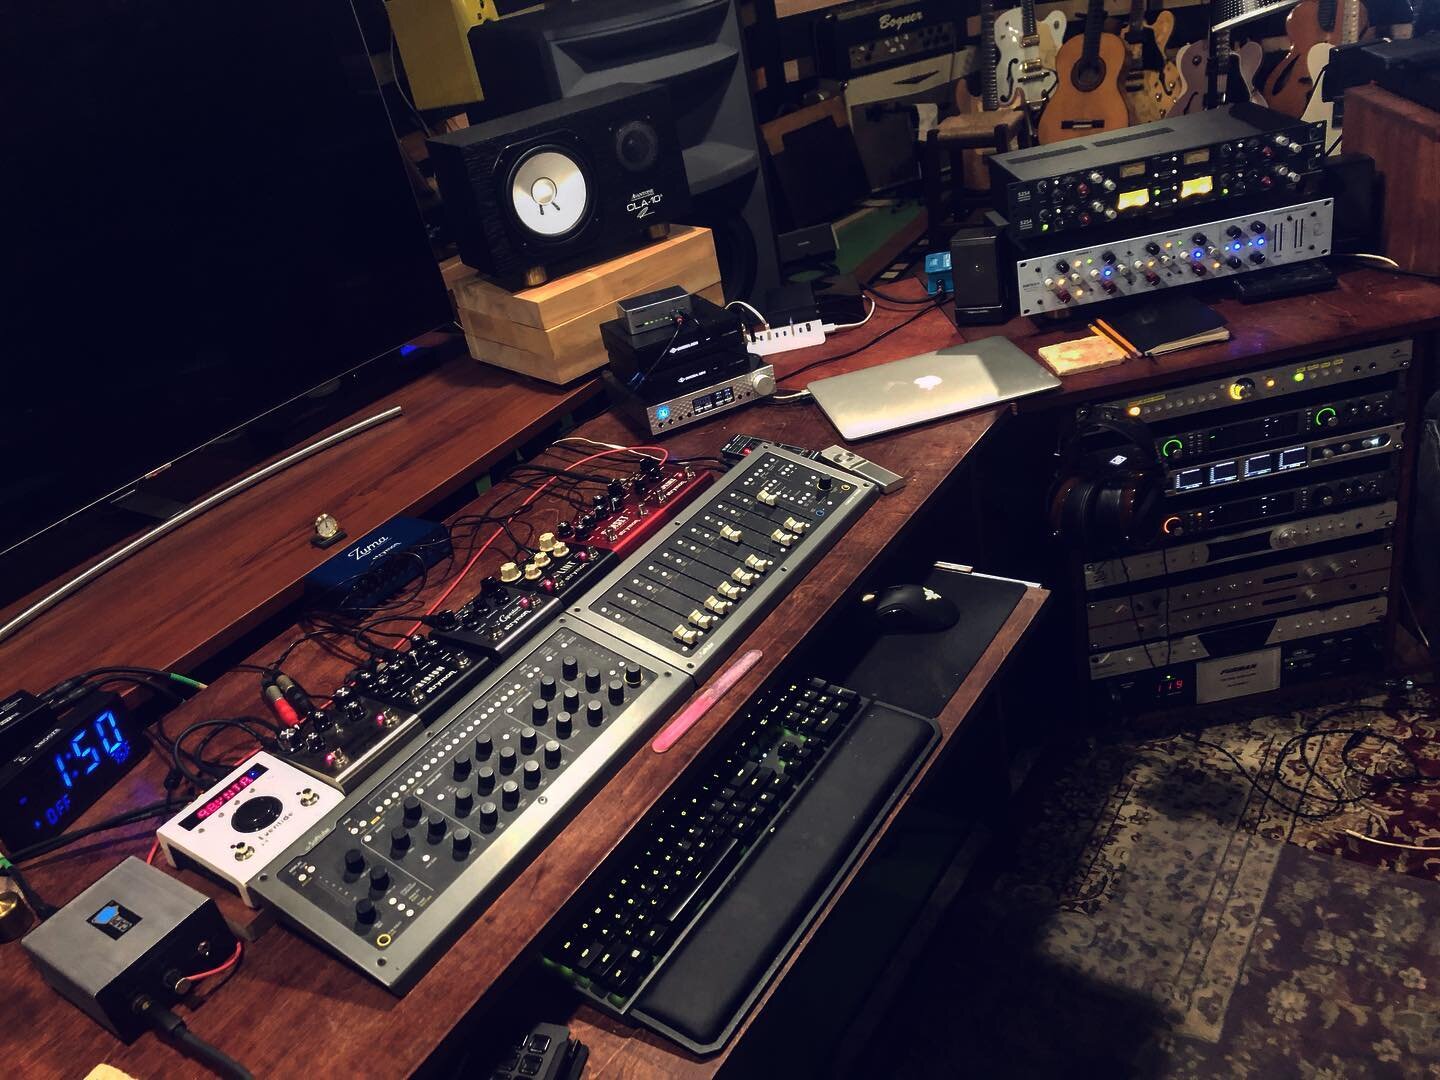 What&rsquo;s your signal chain look like? This @strymonengineering external FX loop in the BauHaus studio is 100% on point!